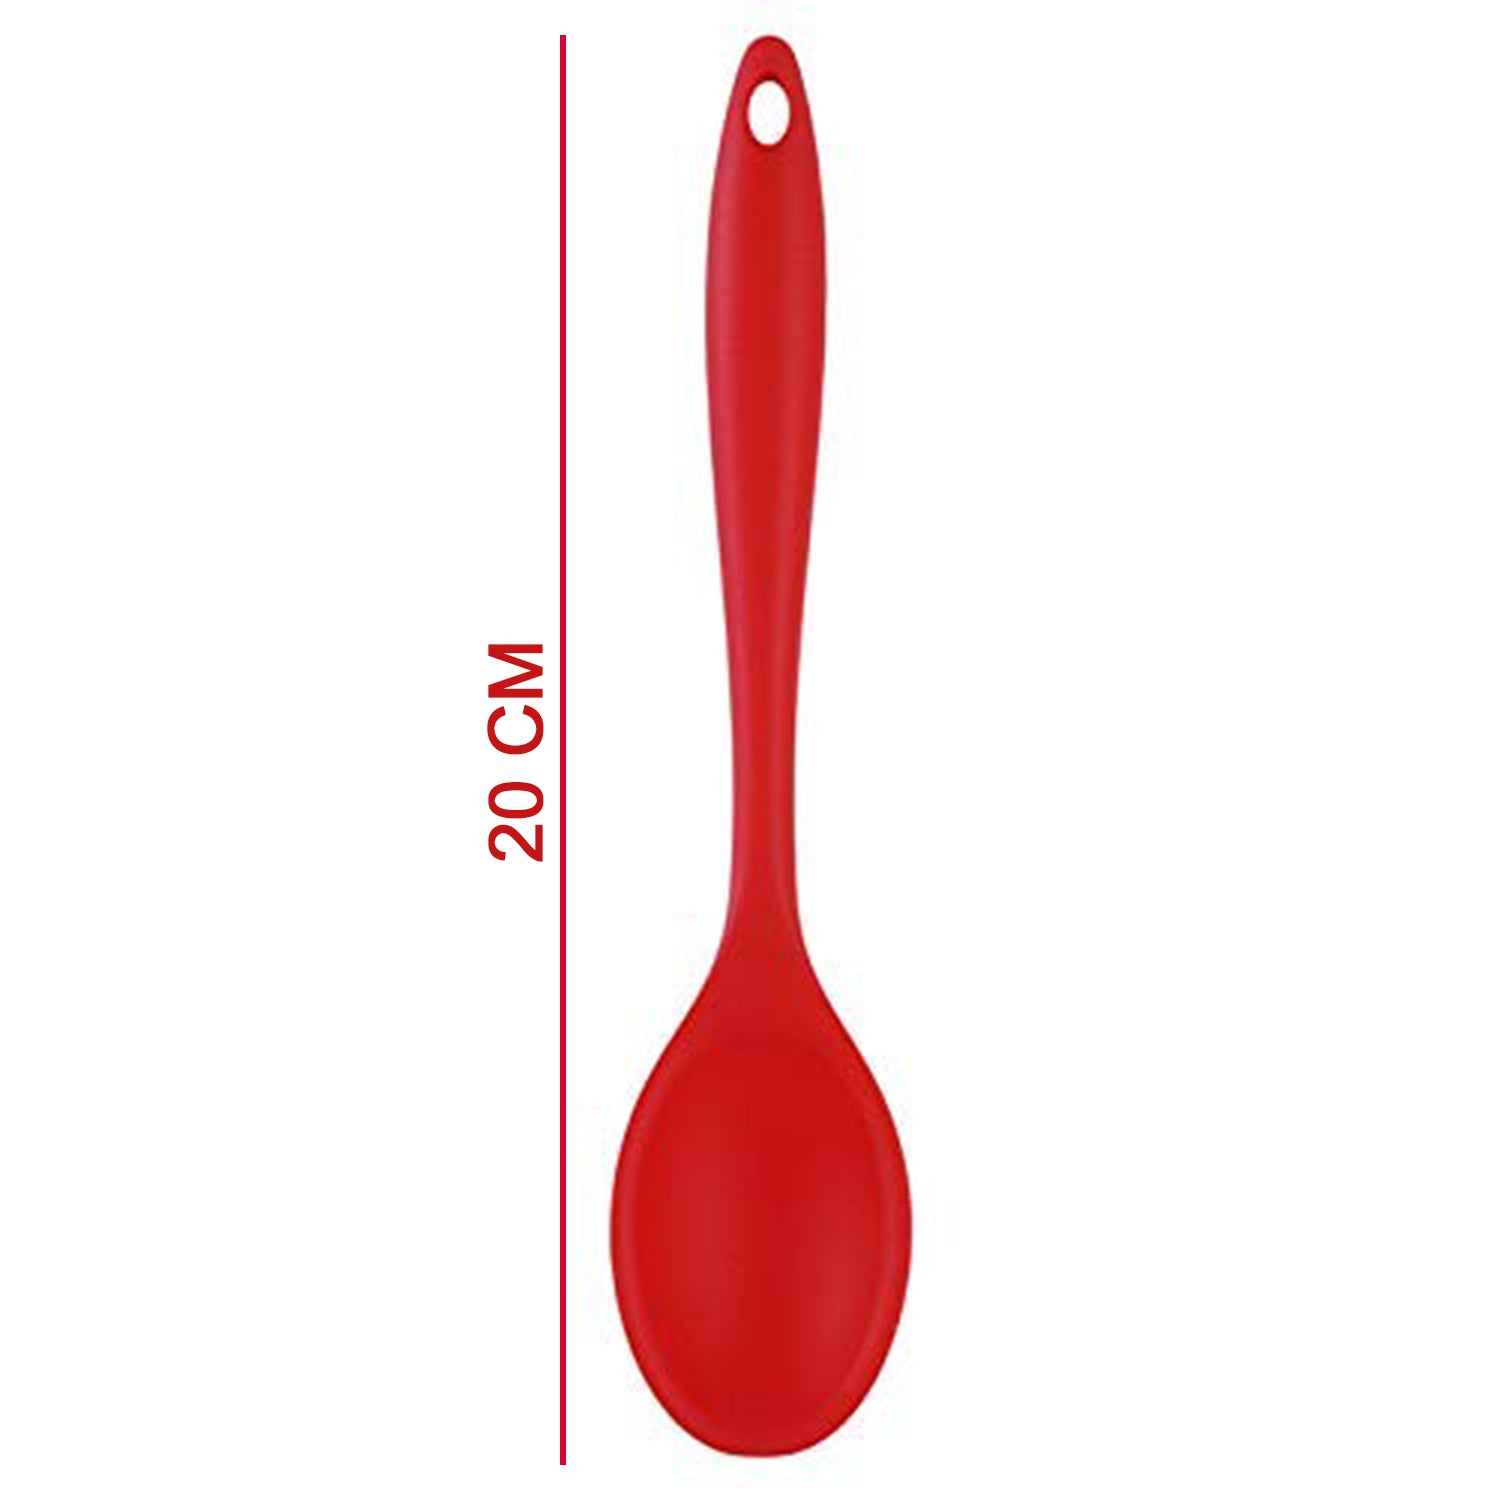 2101 Non-Stick Small Silicone Stainless Steel with Silicone Coating Spatula spoon. DukanDaily